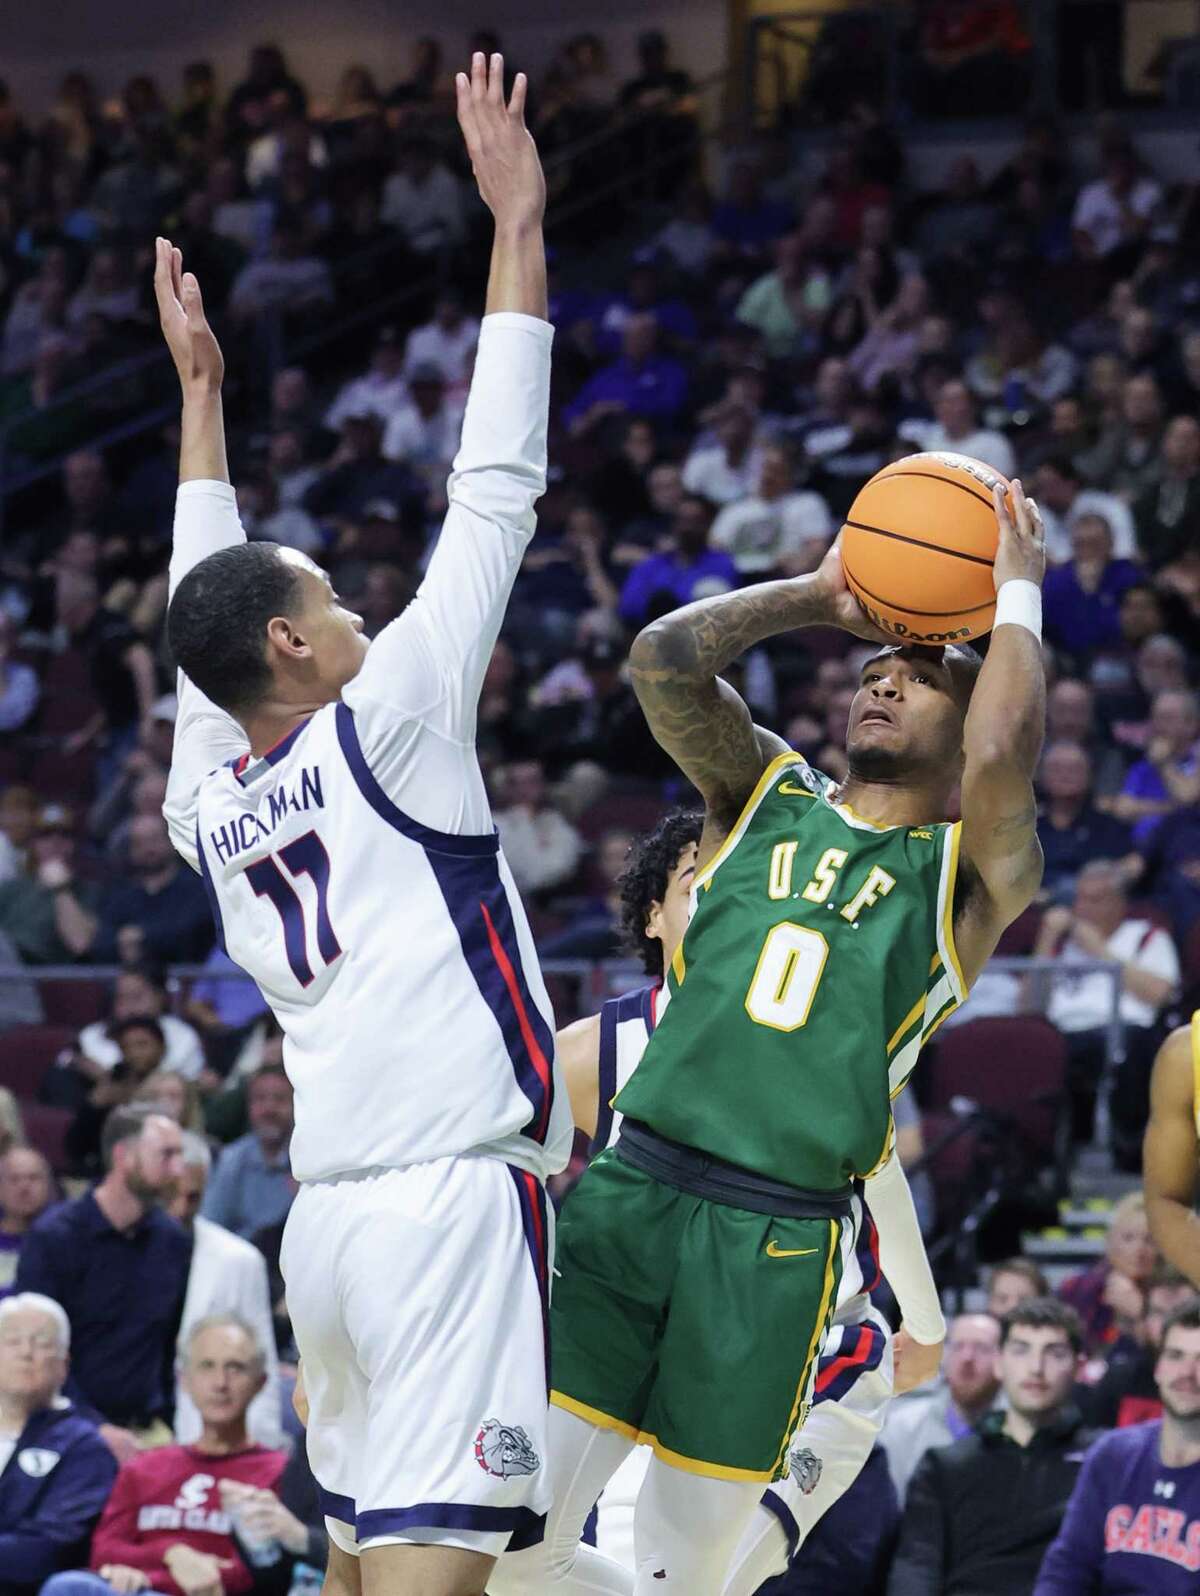 Khalil Shabazz of the USF Dons shoots against Nolan Hickman of the Gonzaga Bulldogs in the first half of a semifinal game of the West Coast Conference basketball tournament on Monday.